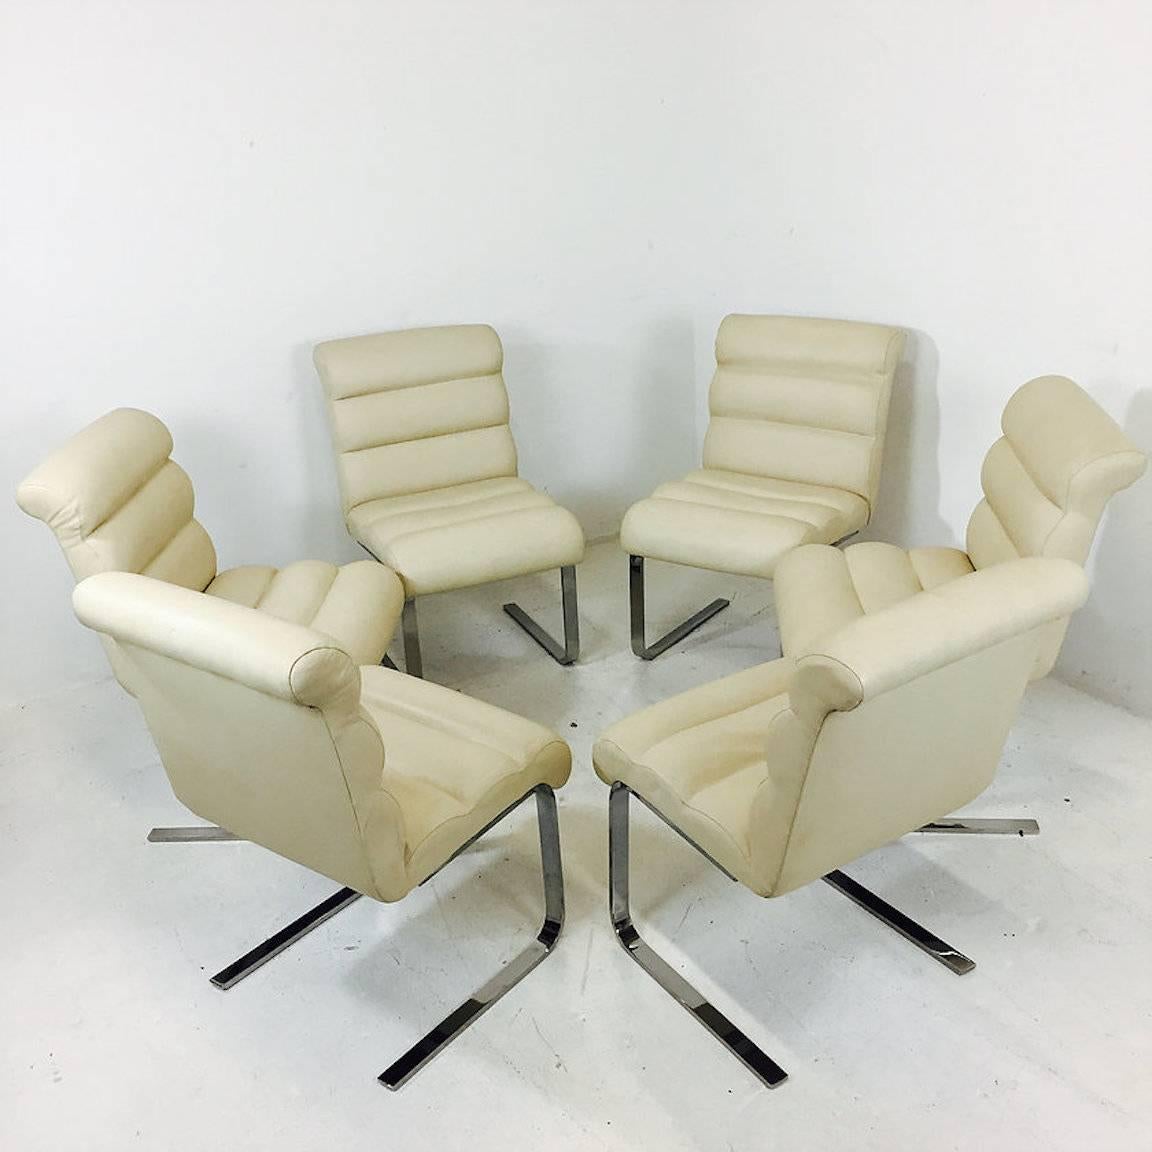 Set of six chrome-plated cantilever dining chairs. Chairs are upholstered in a cream vinyl that does has small rips in a couple of chairs. New upholstery is recommended.

Dimension: 21" W x 27" D x 34" T
seat height 19".